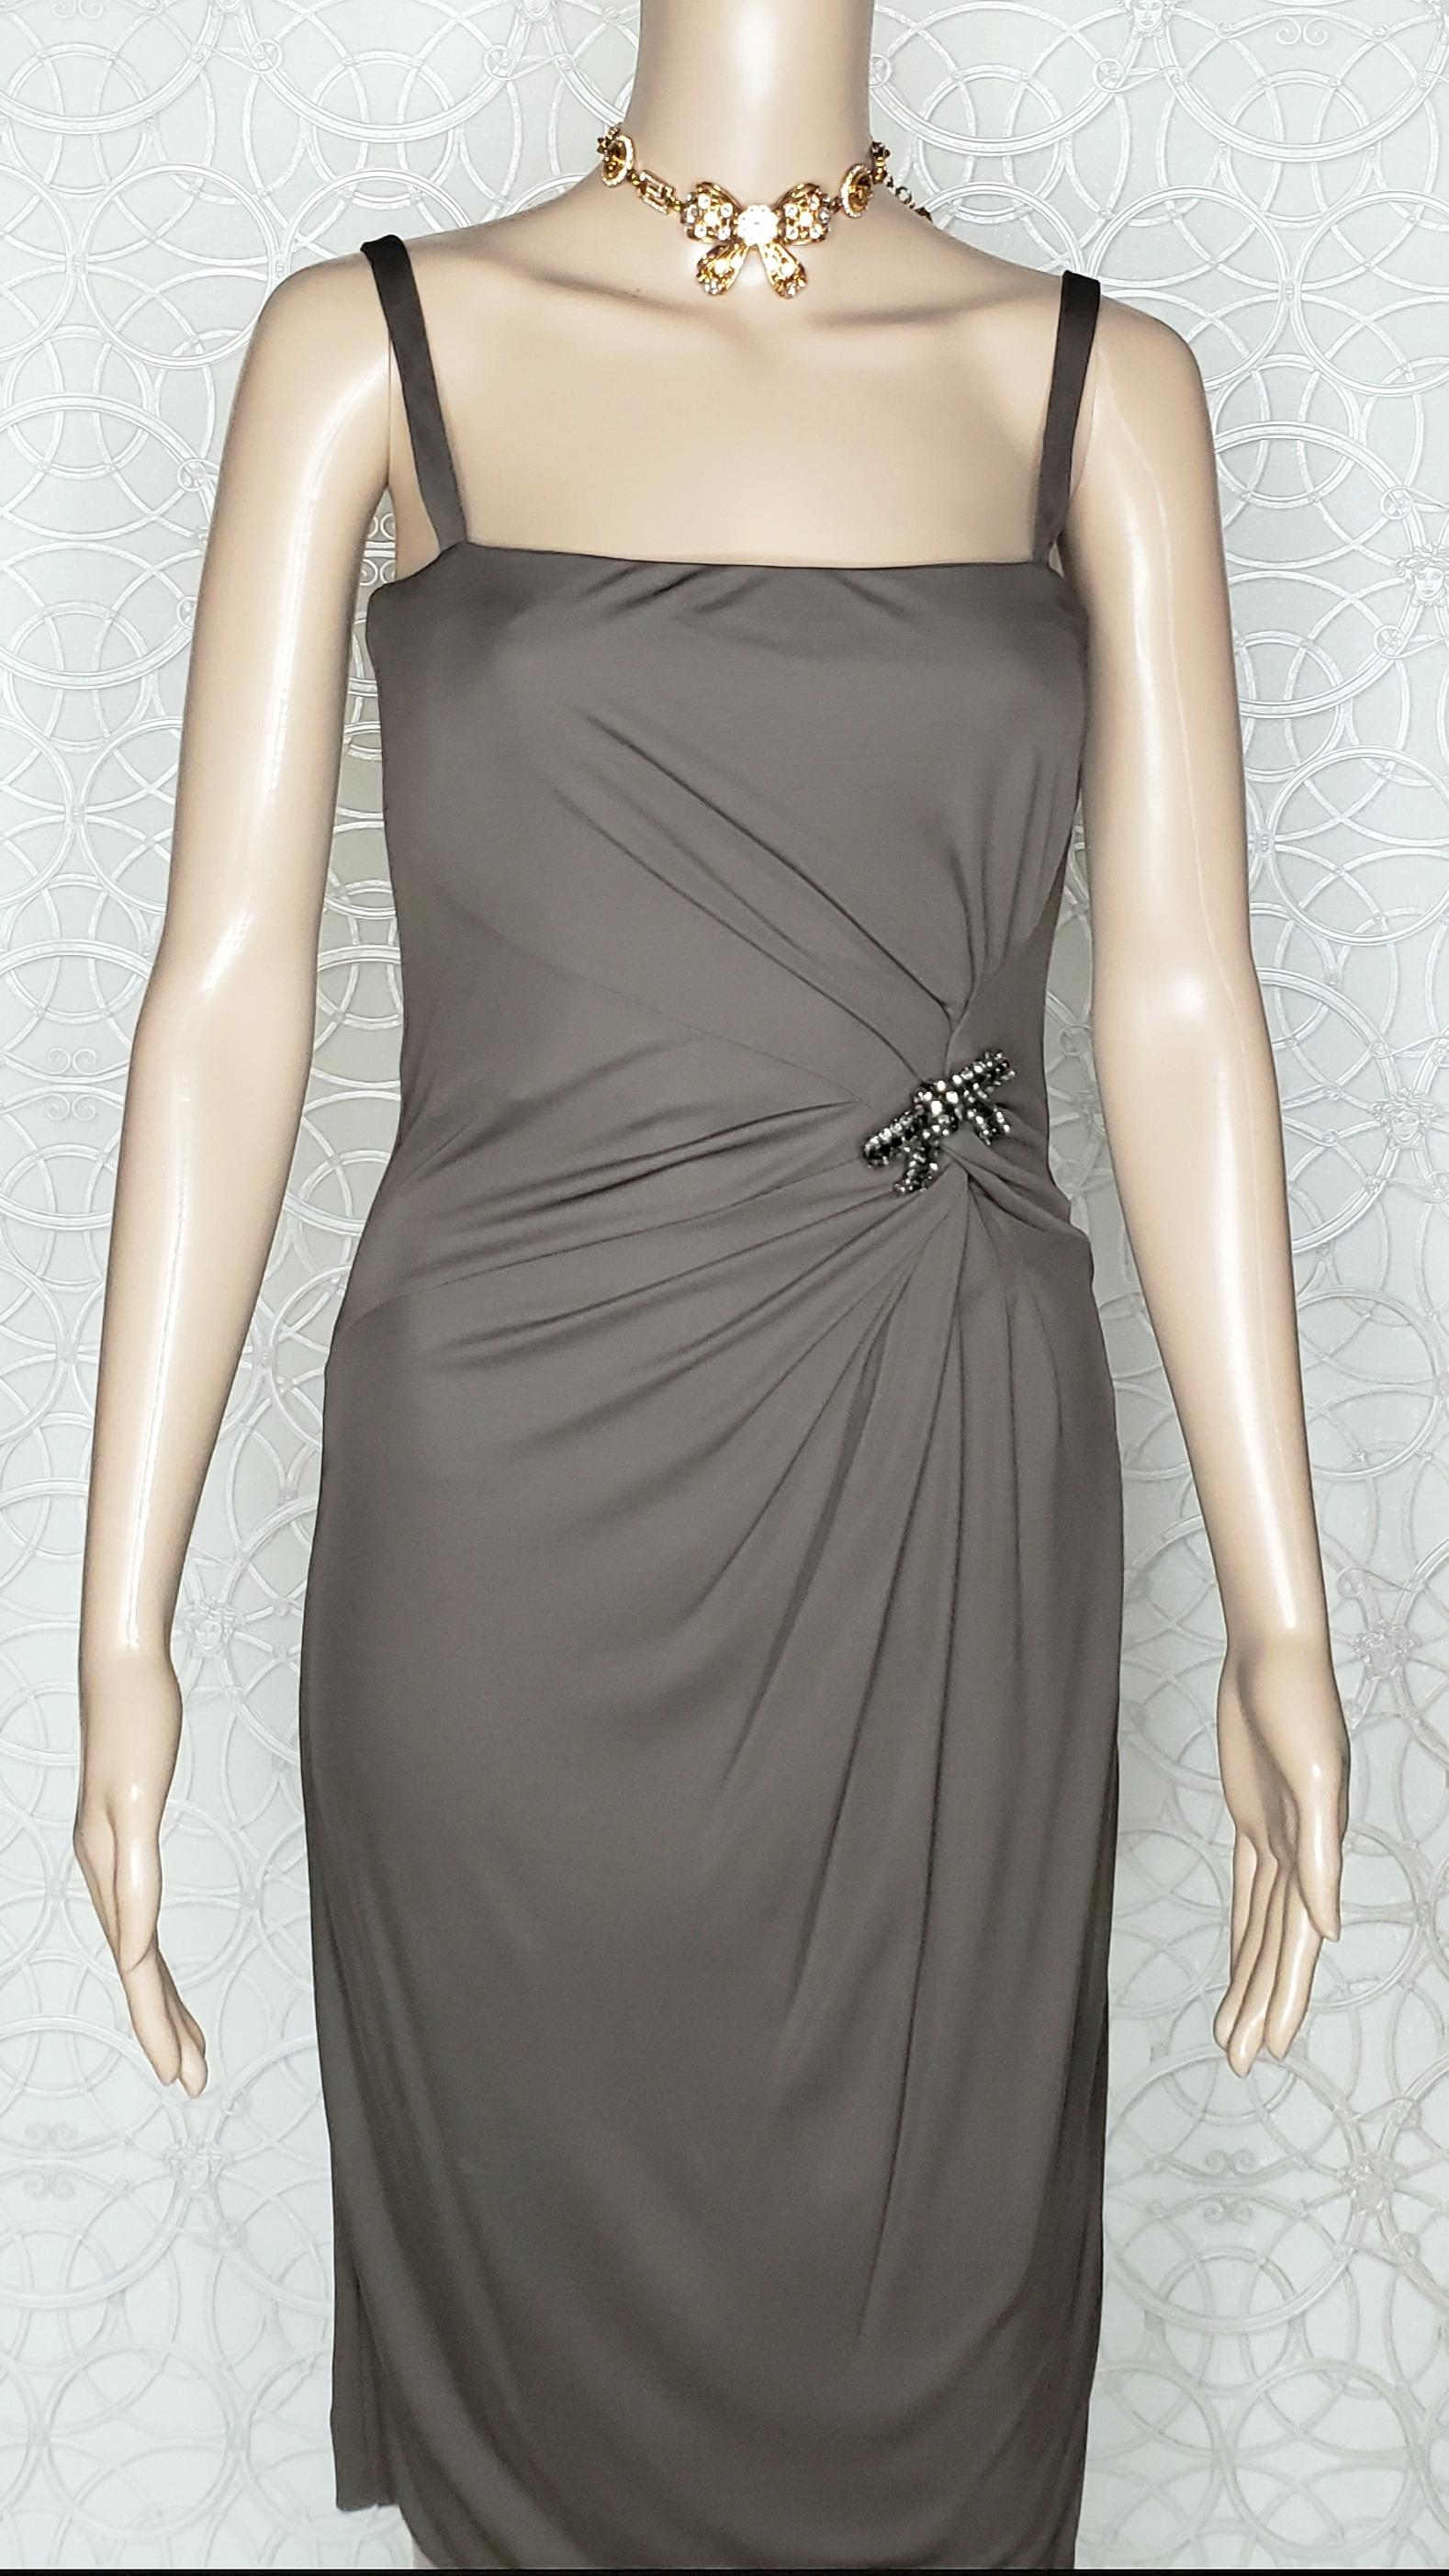 New GUCCI BROWN JERSEY DRESS WITH JEWELED BOW PIN 38 - 4 1